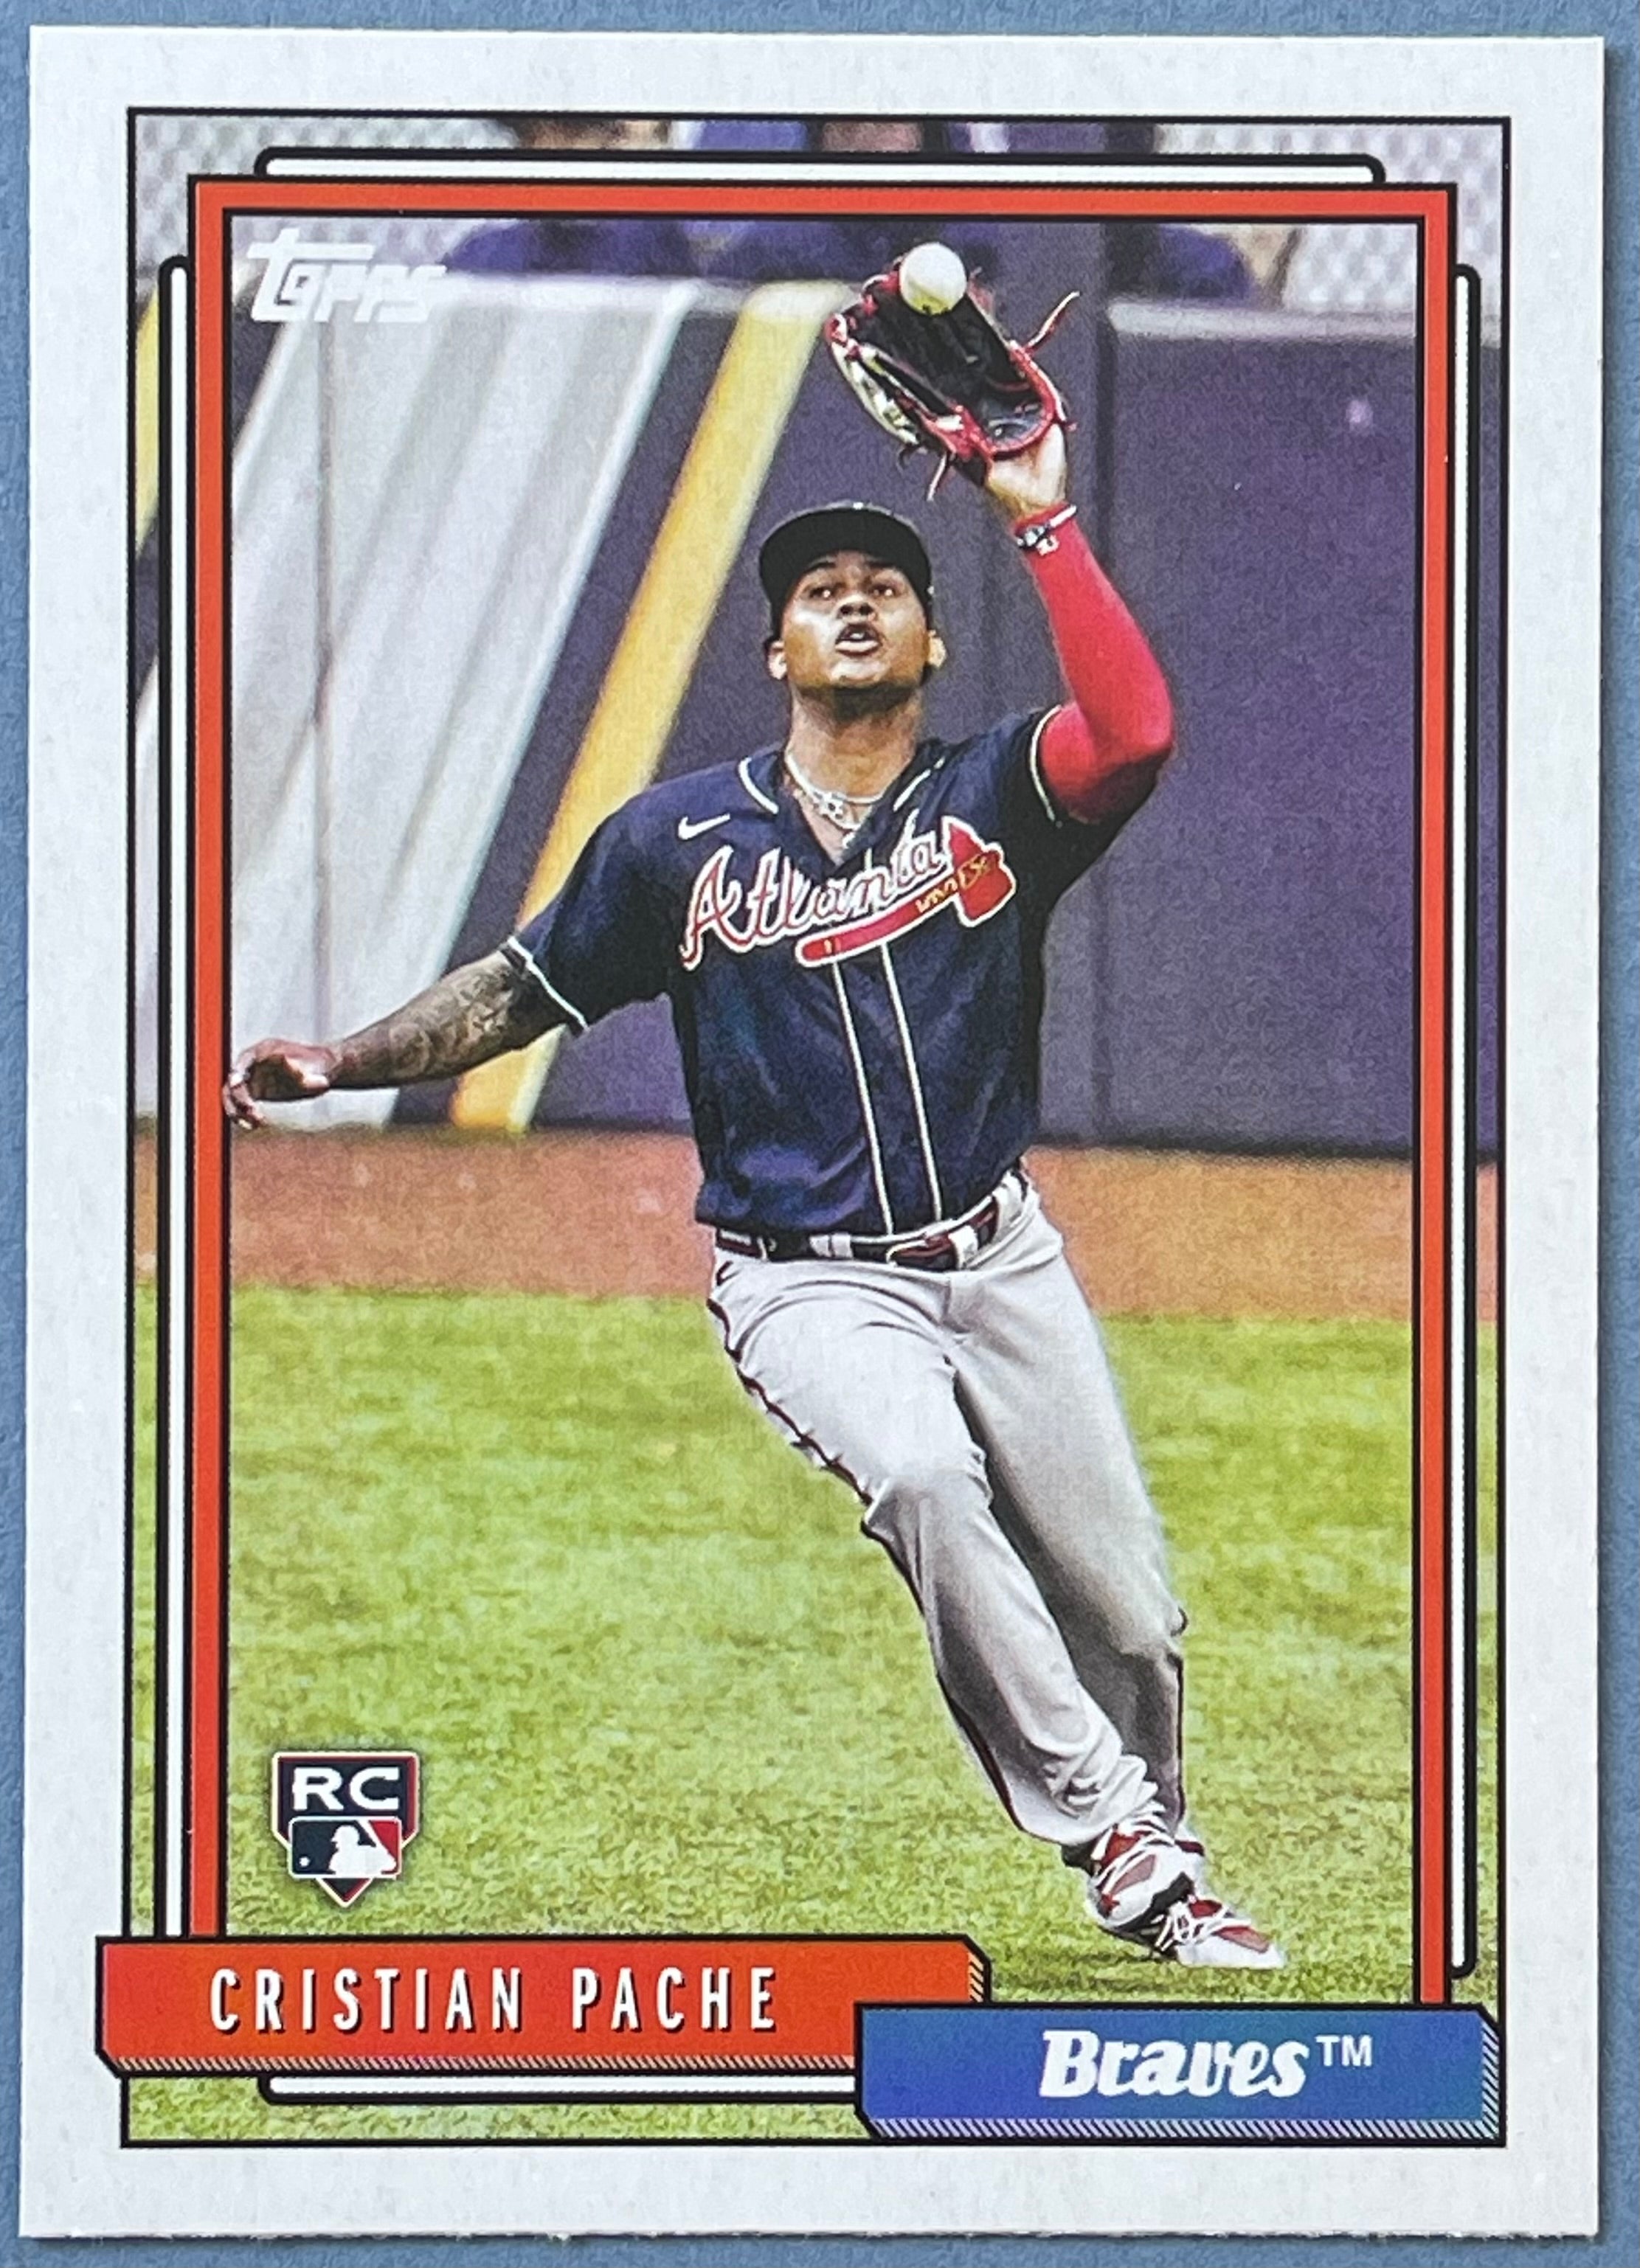 CRISTIAN PACHE 2021 Topps Series 1 #187 Complete Set Photo Image Variation  RC